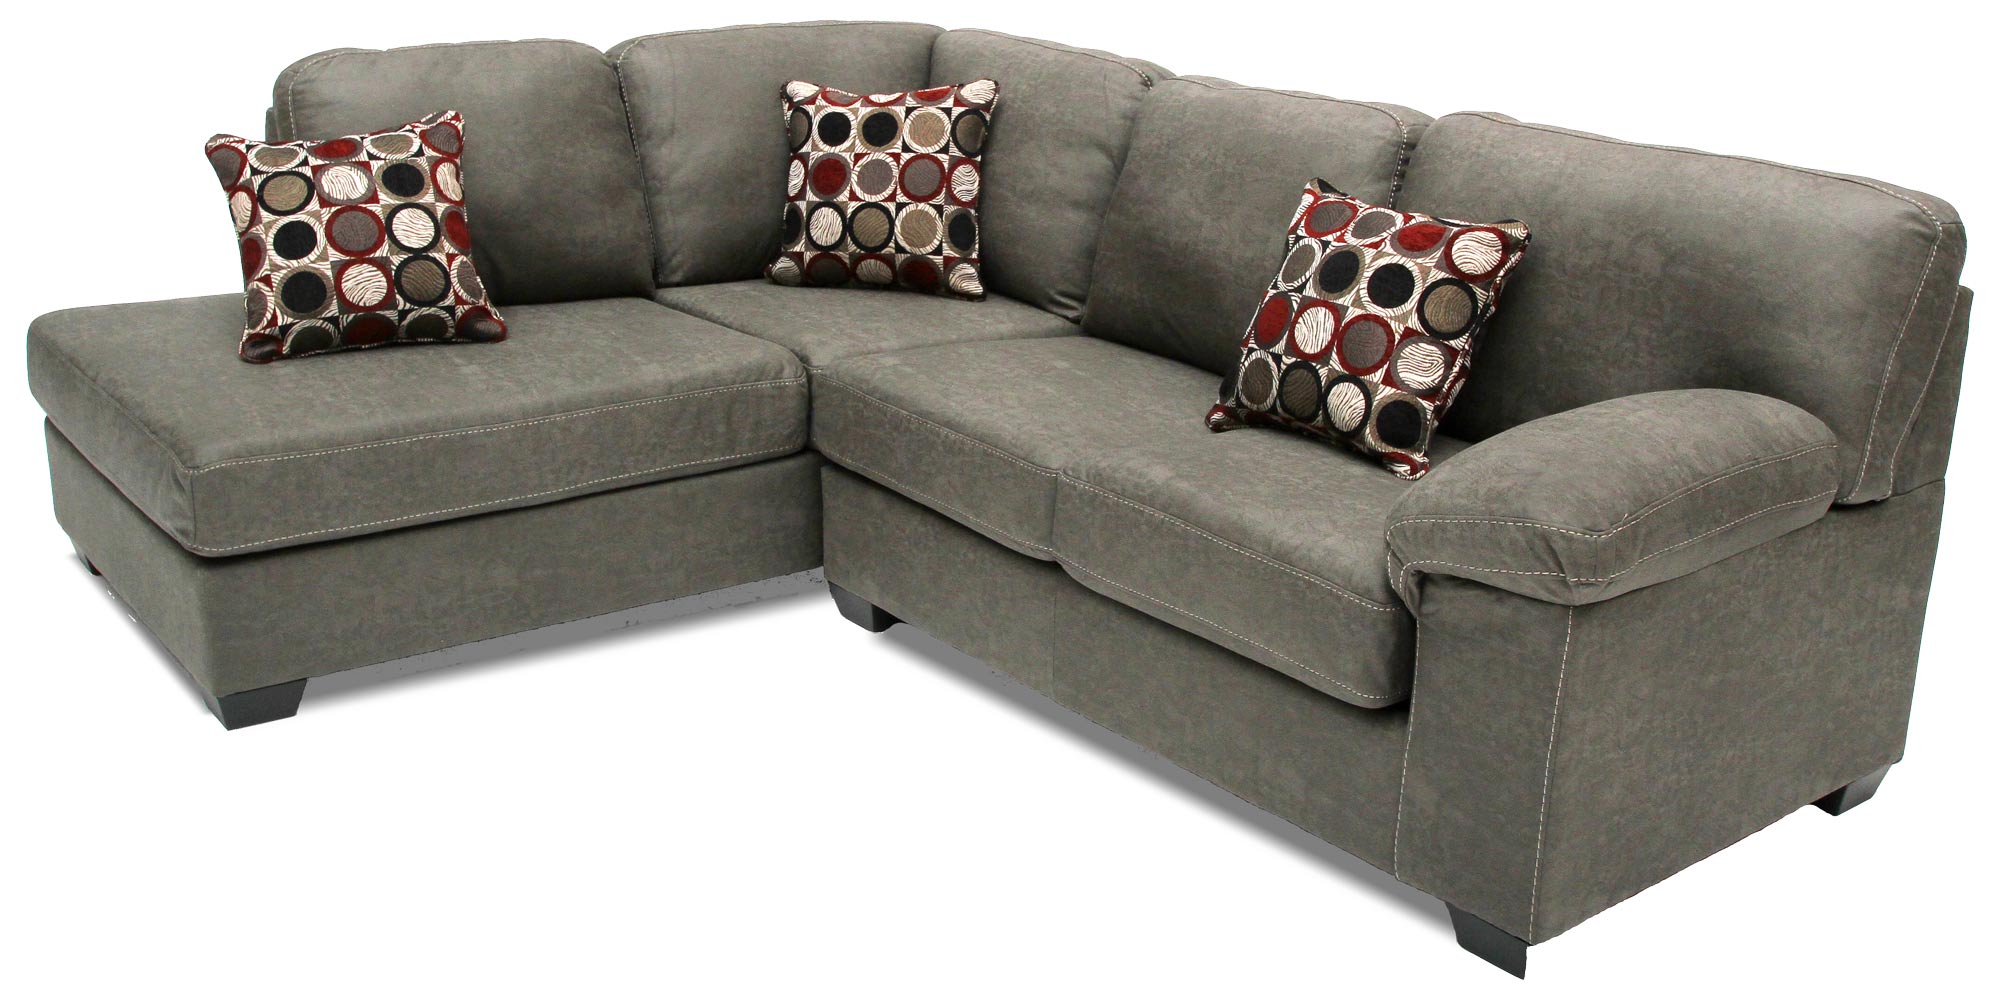 Morty Collection Sectional